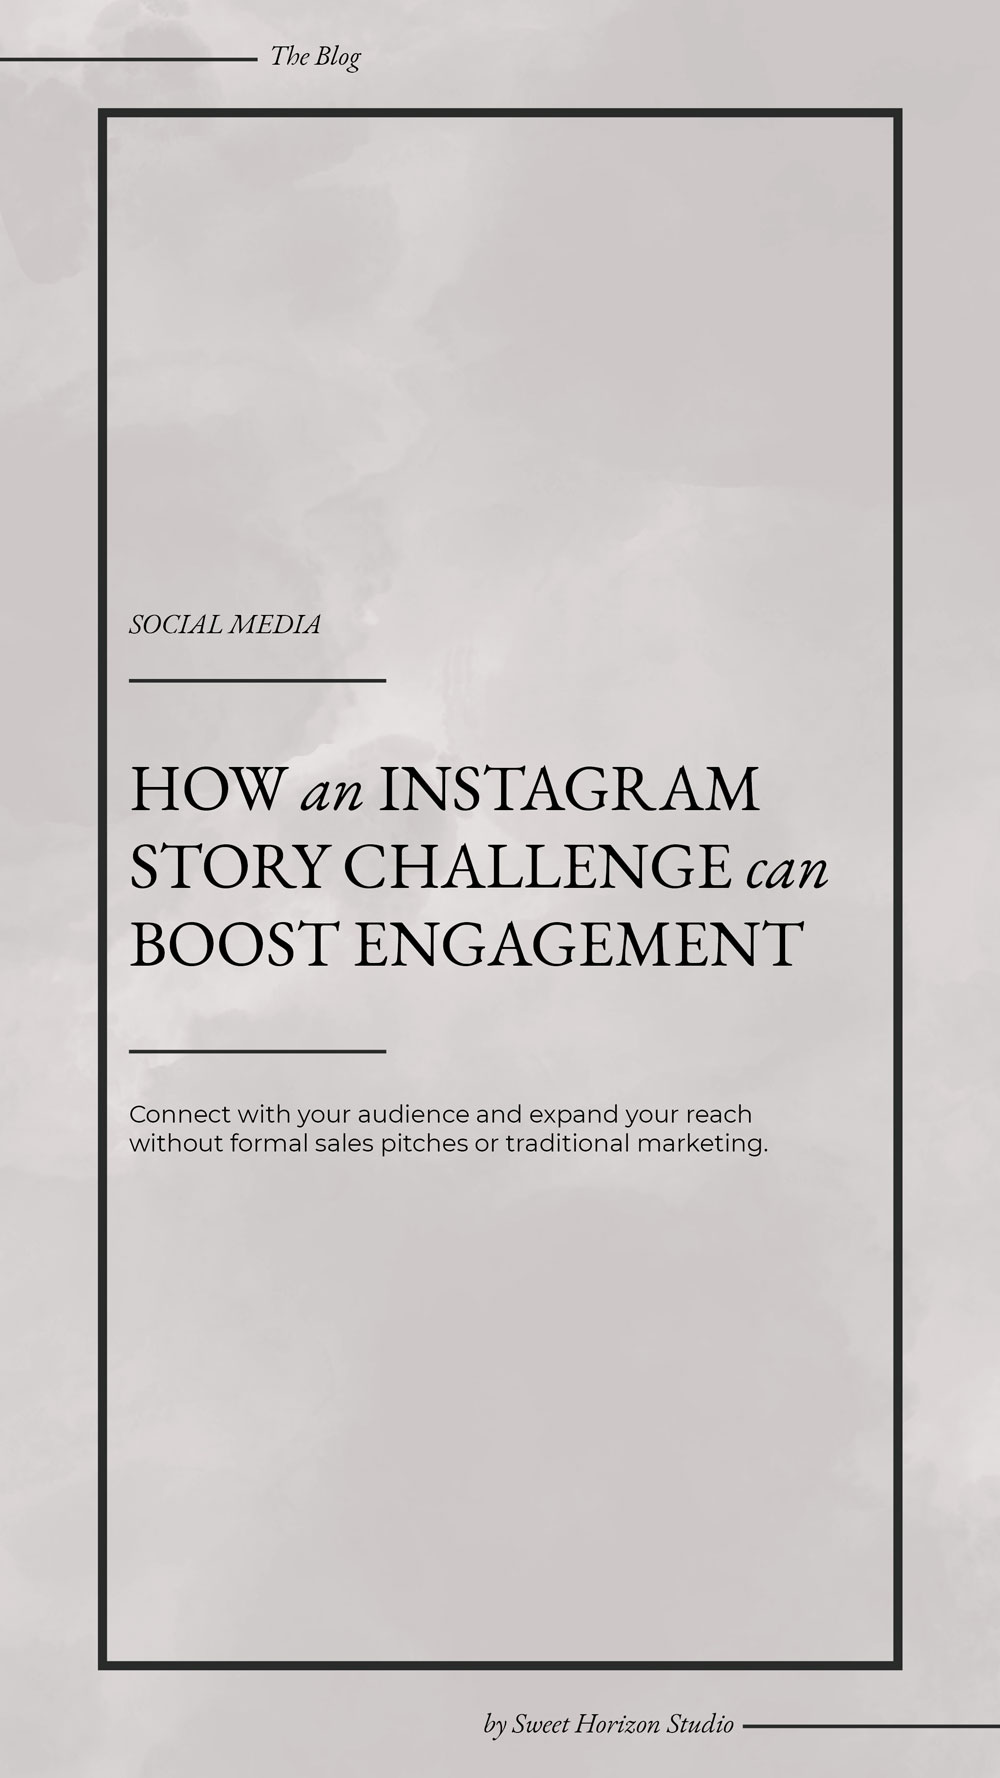 How an Instagram story challenge can boost engagement from www.sweethorizonblog.com